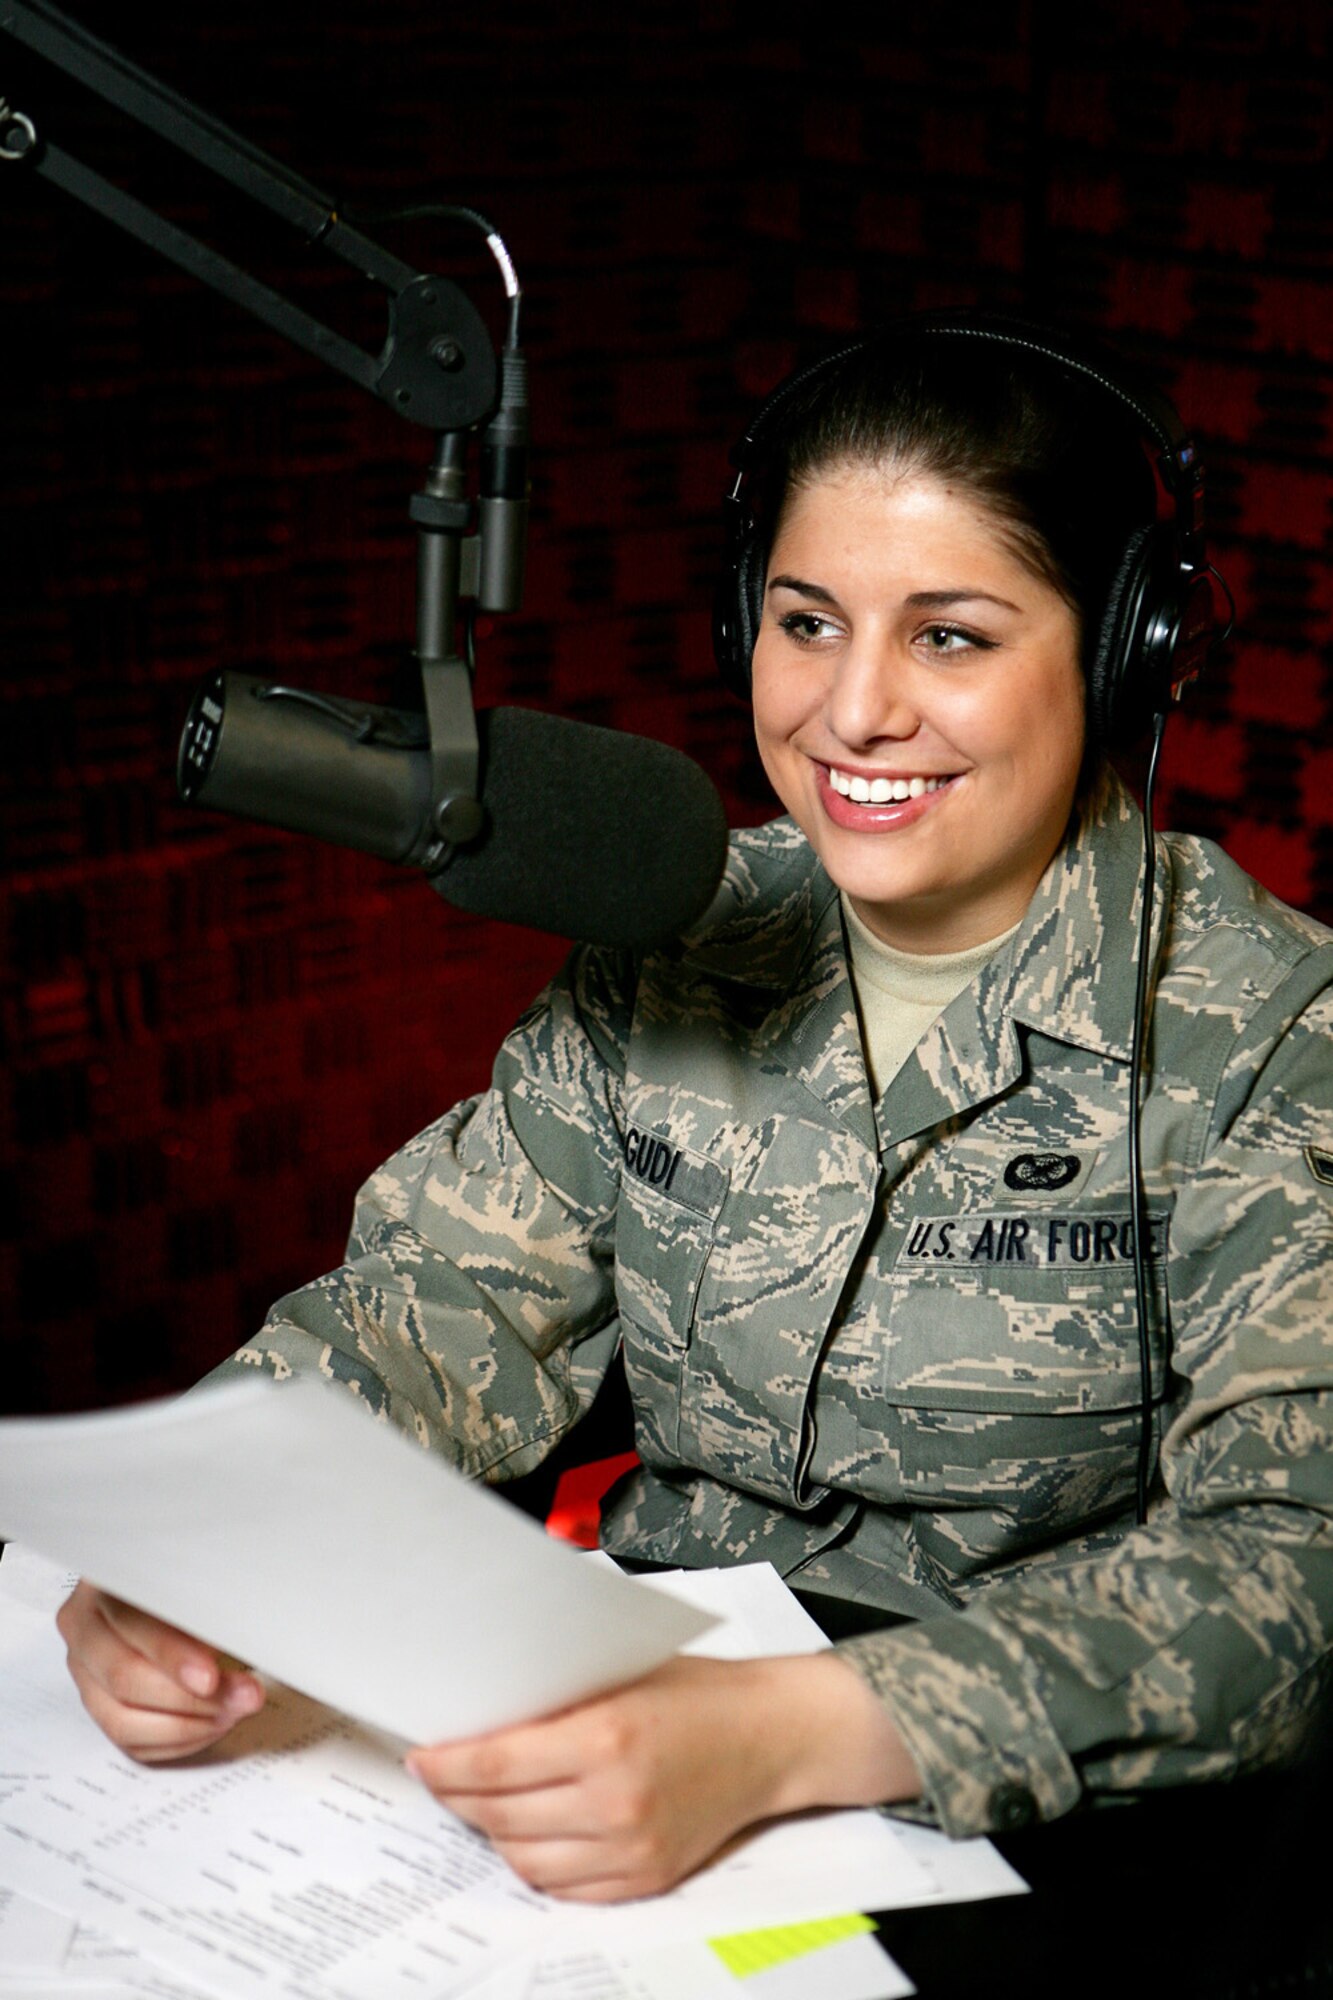 Airman Lauren Lagudi, a radio DJ on American Forces Network Aviano, Defense Media Activity, performs her morning radio show in the AFN radio booth March 17.  Airman Lagudi is one of five members of AFN Aviano who were recently recognized as among the best in Air Force broadcasting during the 2008 Air Force Media Contest. Airman Lagudi was named the 2008 Air Force Outstanding New Broadcaster. (U.S. Air Force photo/Senior Master Sgt. Robert W. Valenca)   